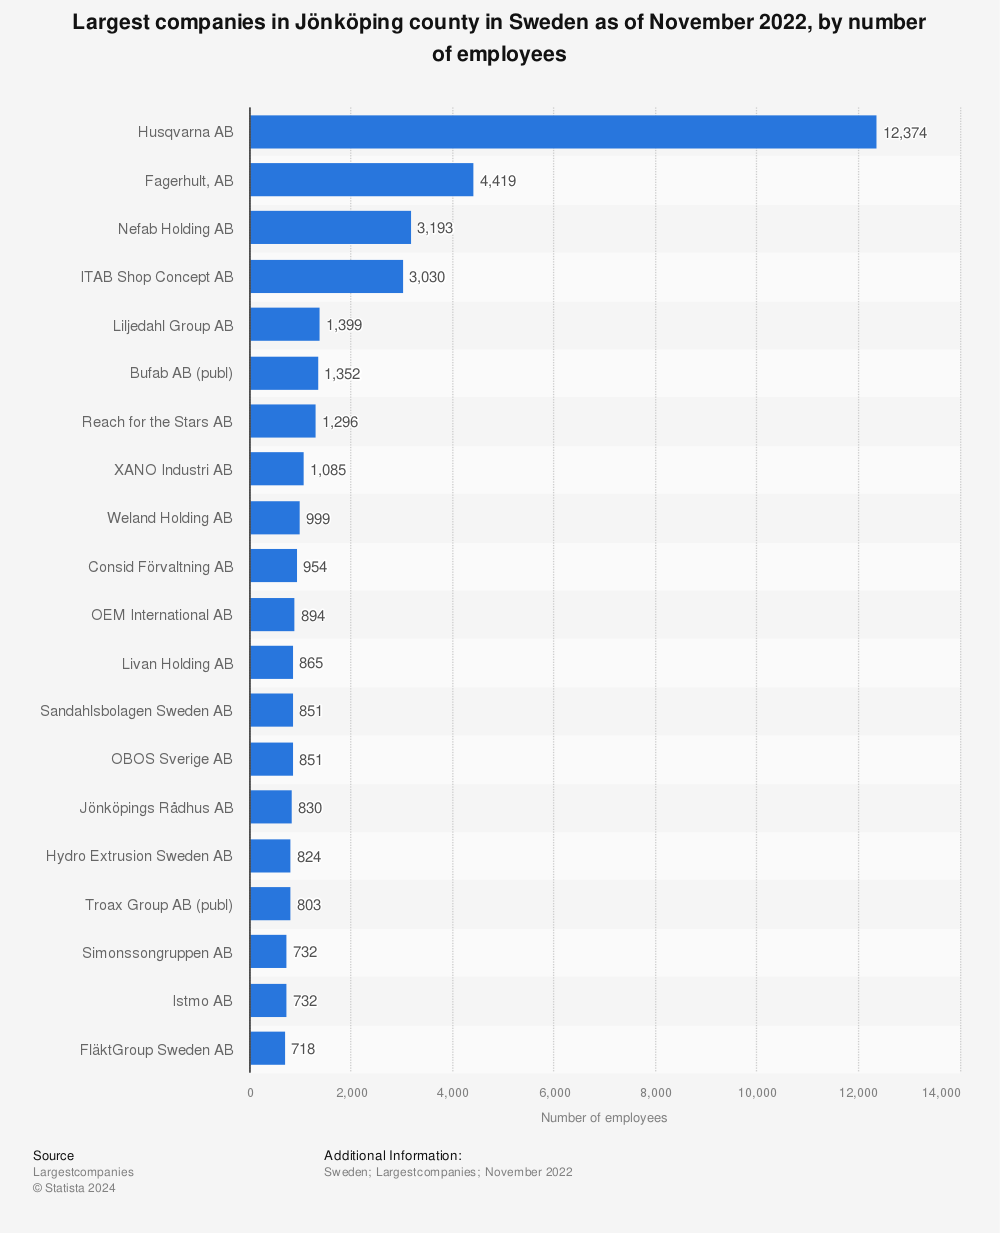 Statistic: Largest companies in Jönköping county in Sweden as of November 2022, by number of employees  | Statista